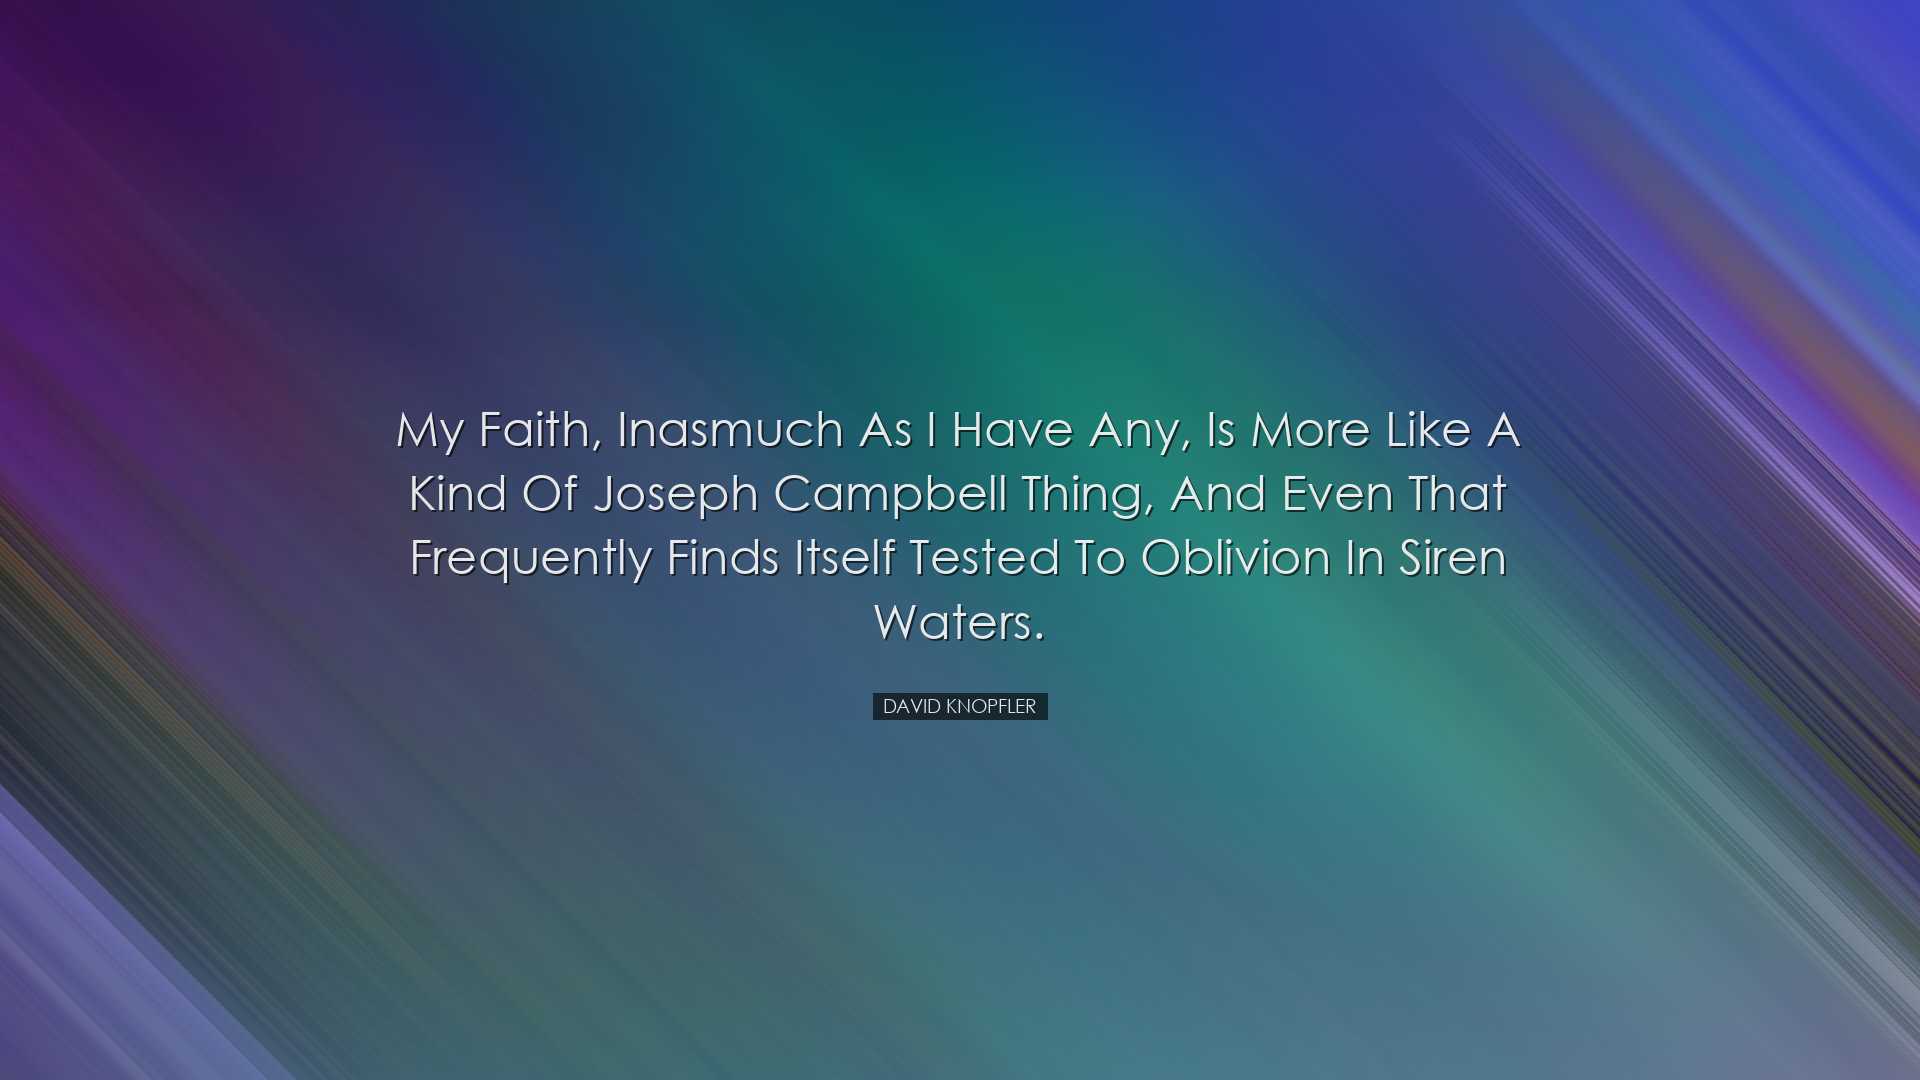 My faith, inasmuch as I have any, is more like a kind of Joseph Ca